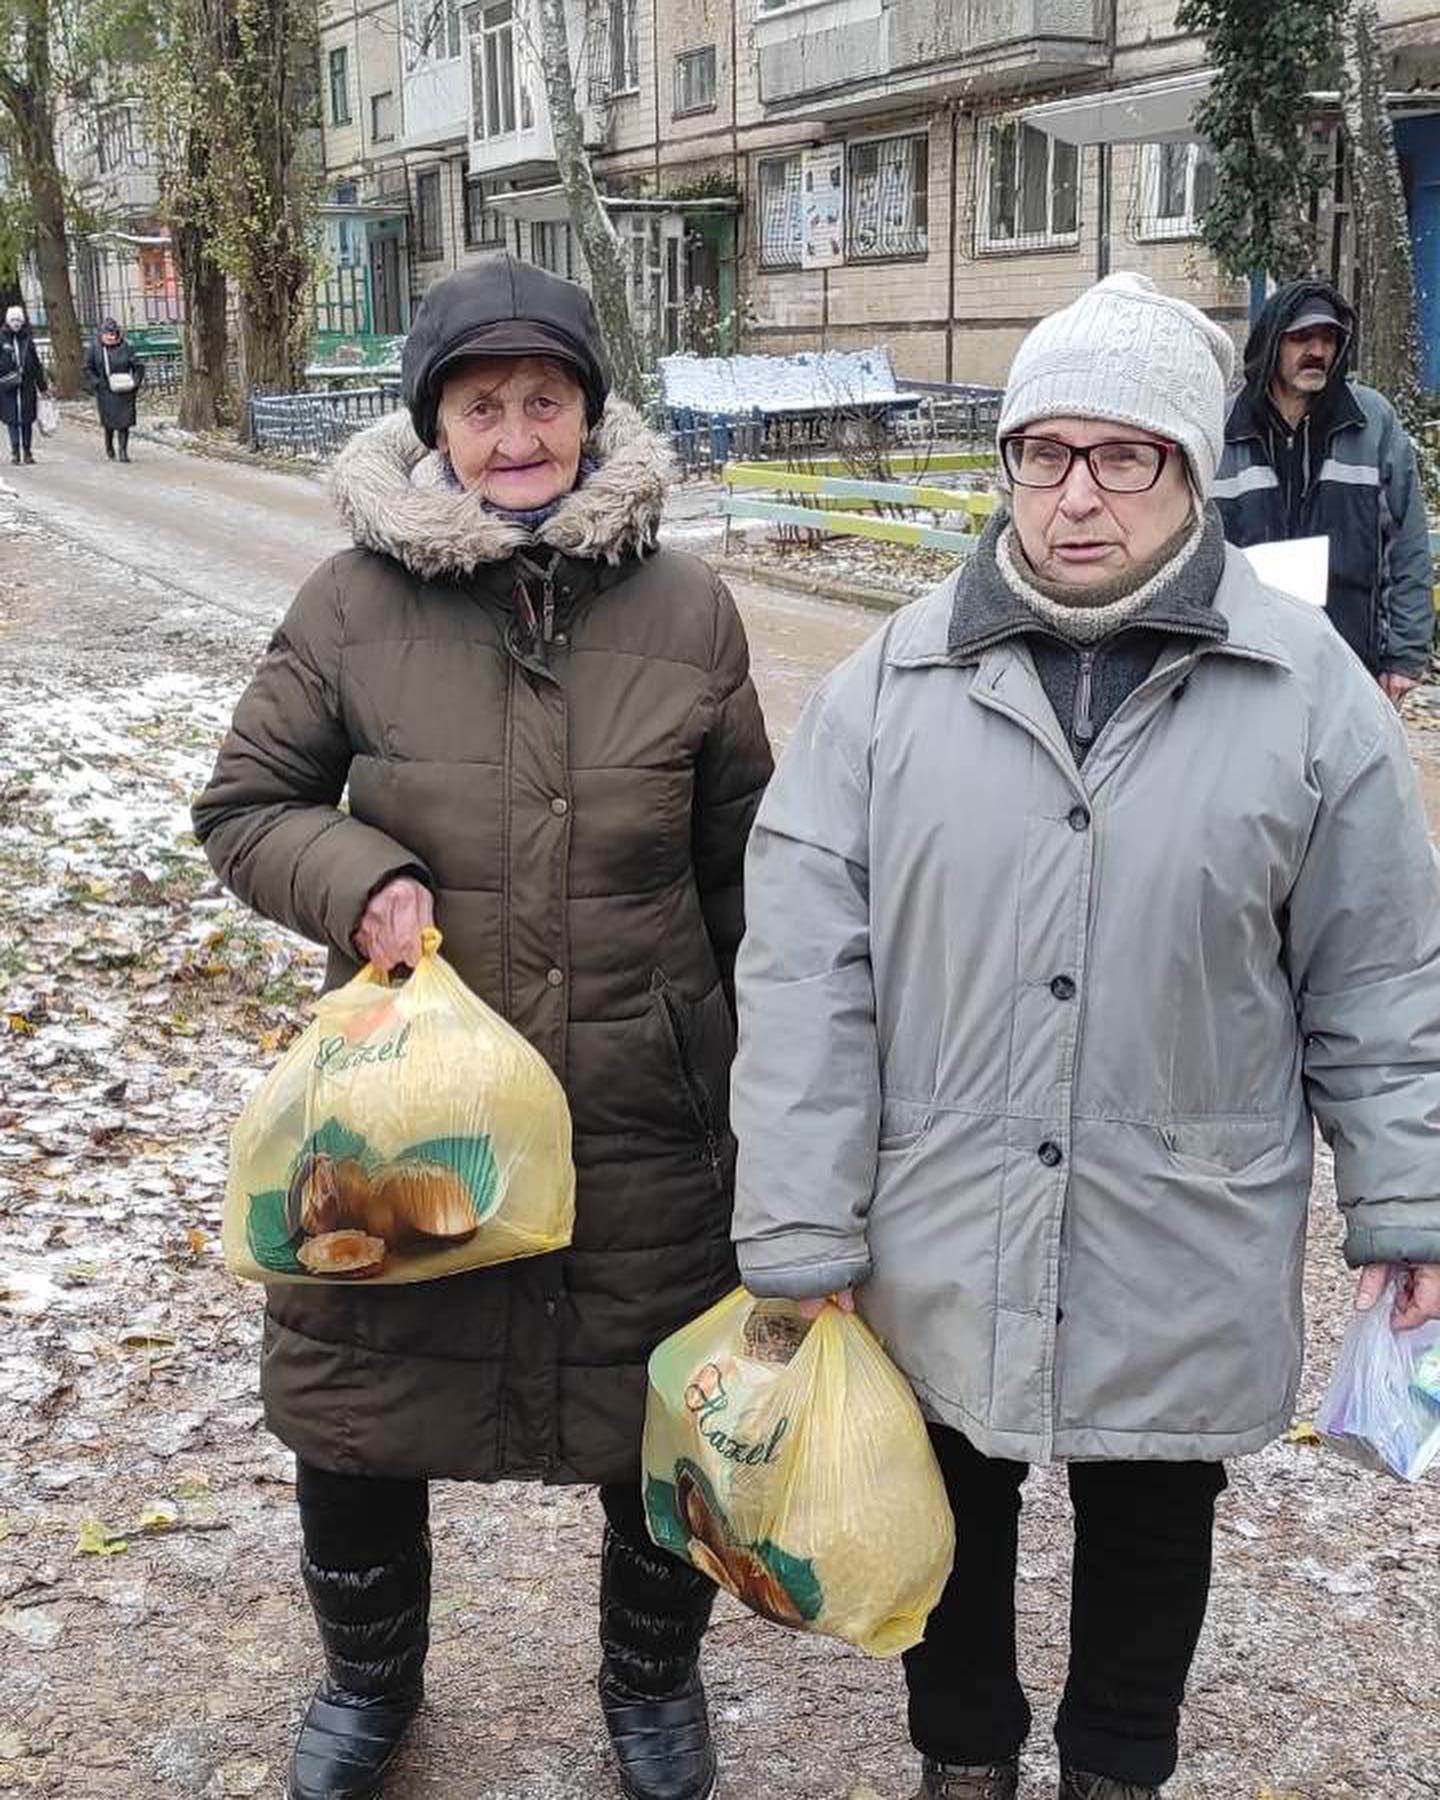 Two women standing on a street with bags of food.